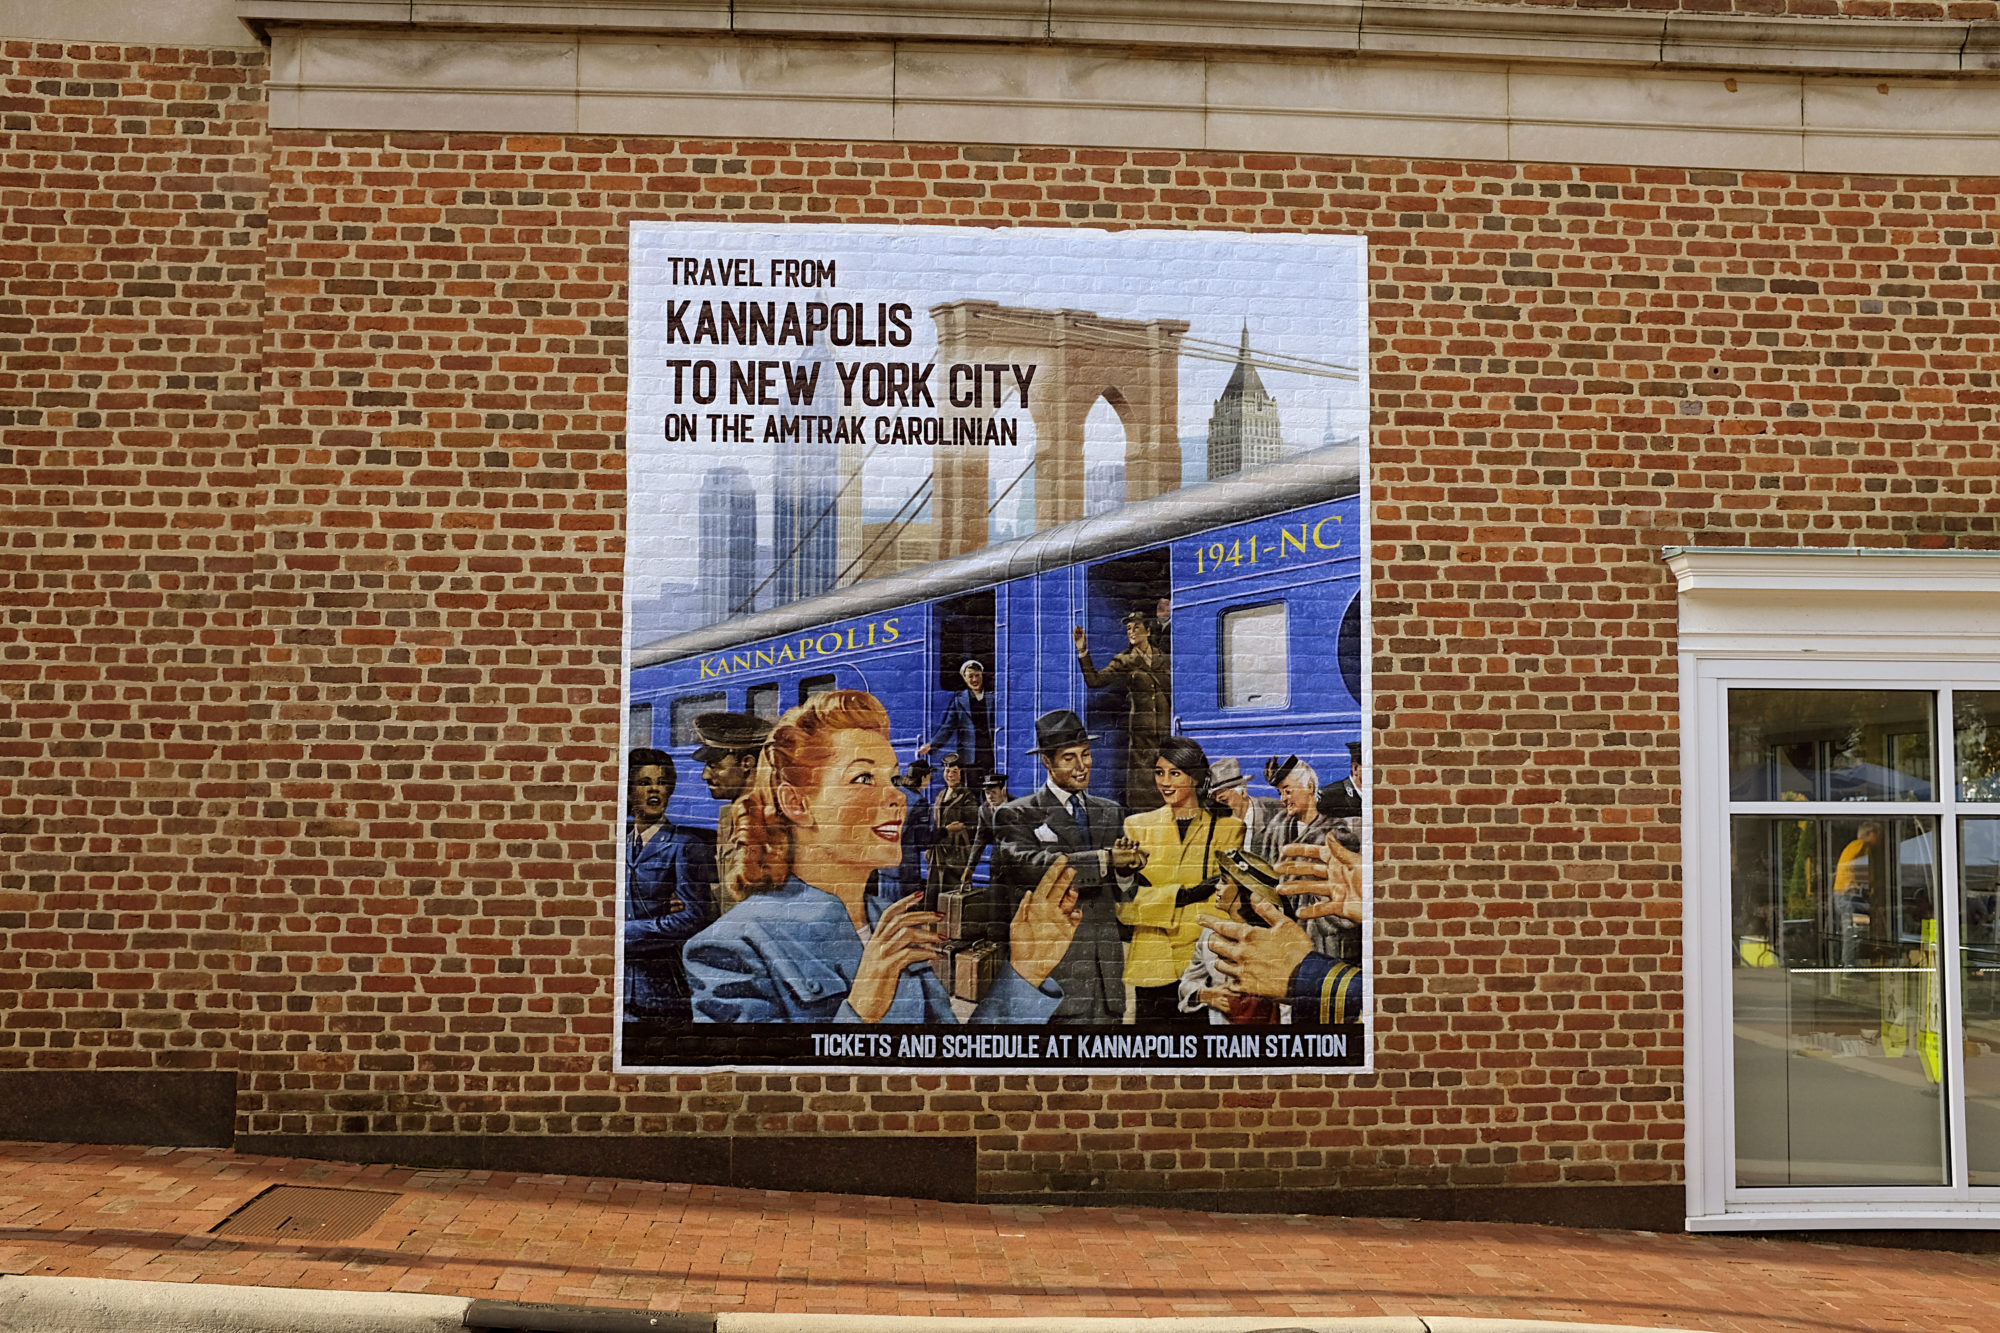 A mural advertising riding Amtrak from Kannapolis to NYC